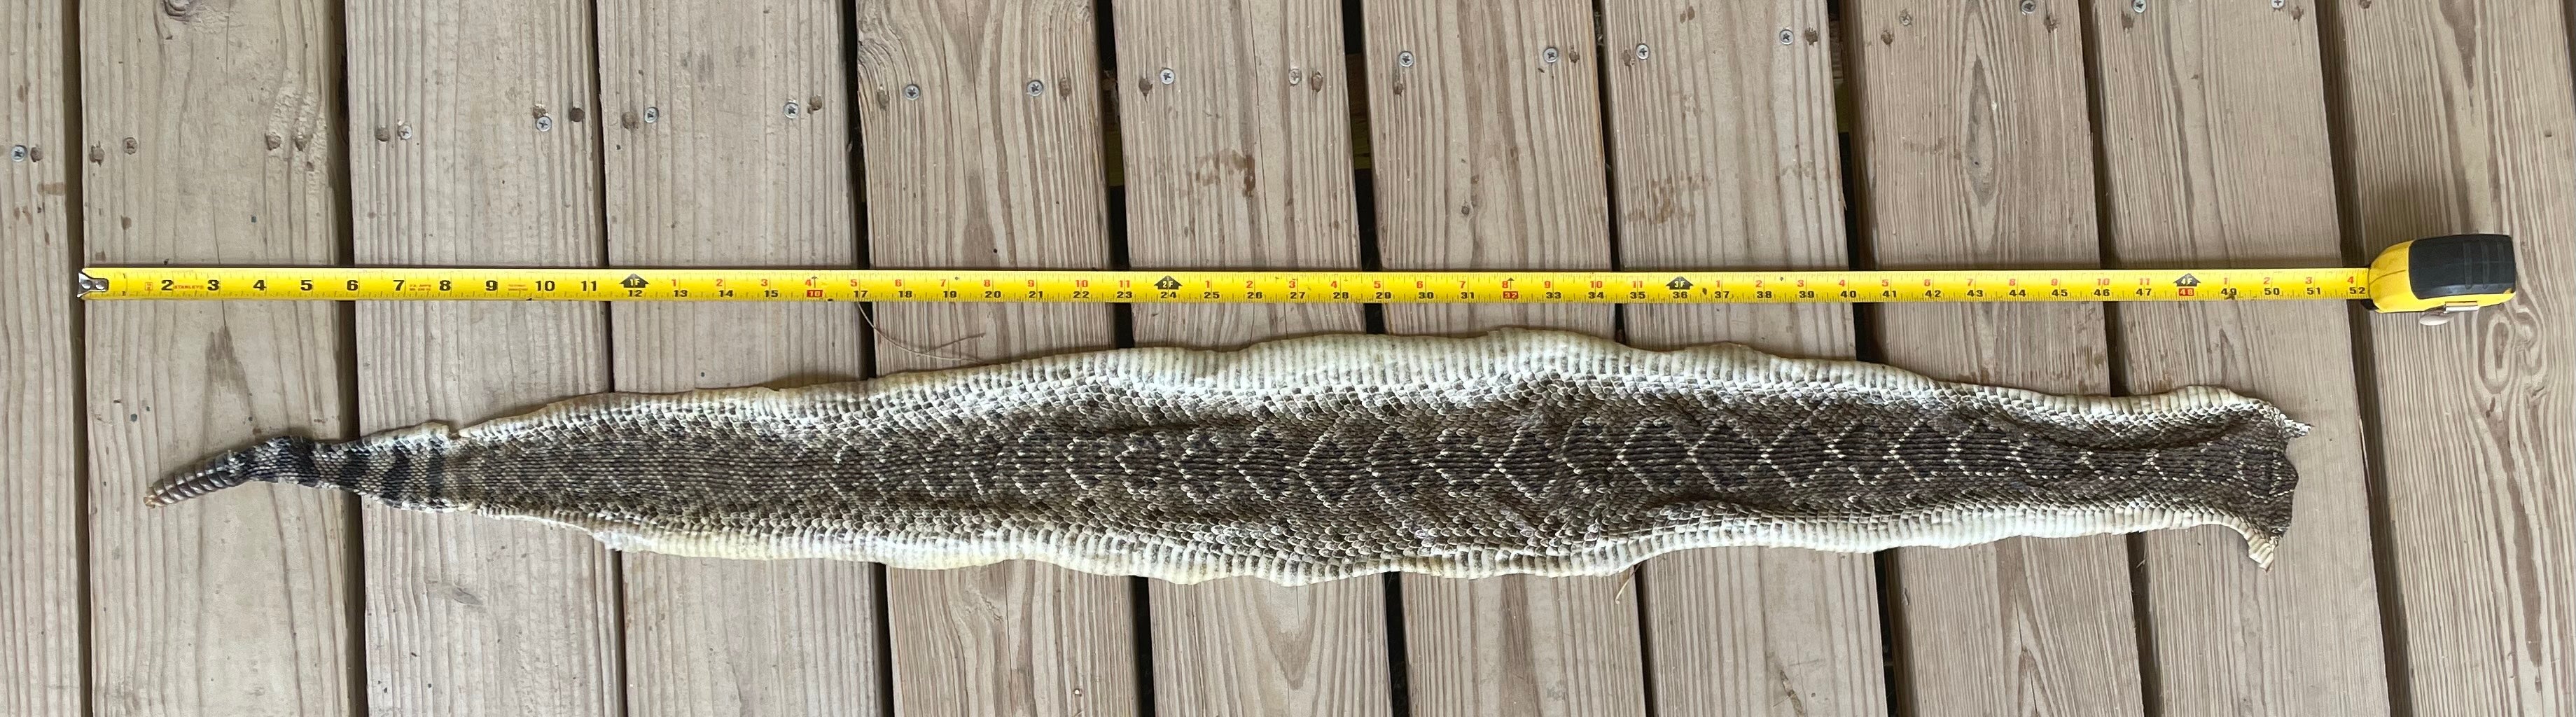 Texas Rattle Snake Skin With 8 Button Rattler 4'1.5"